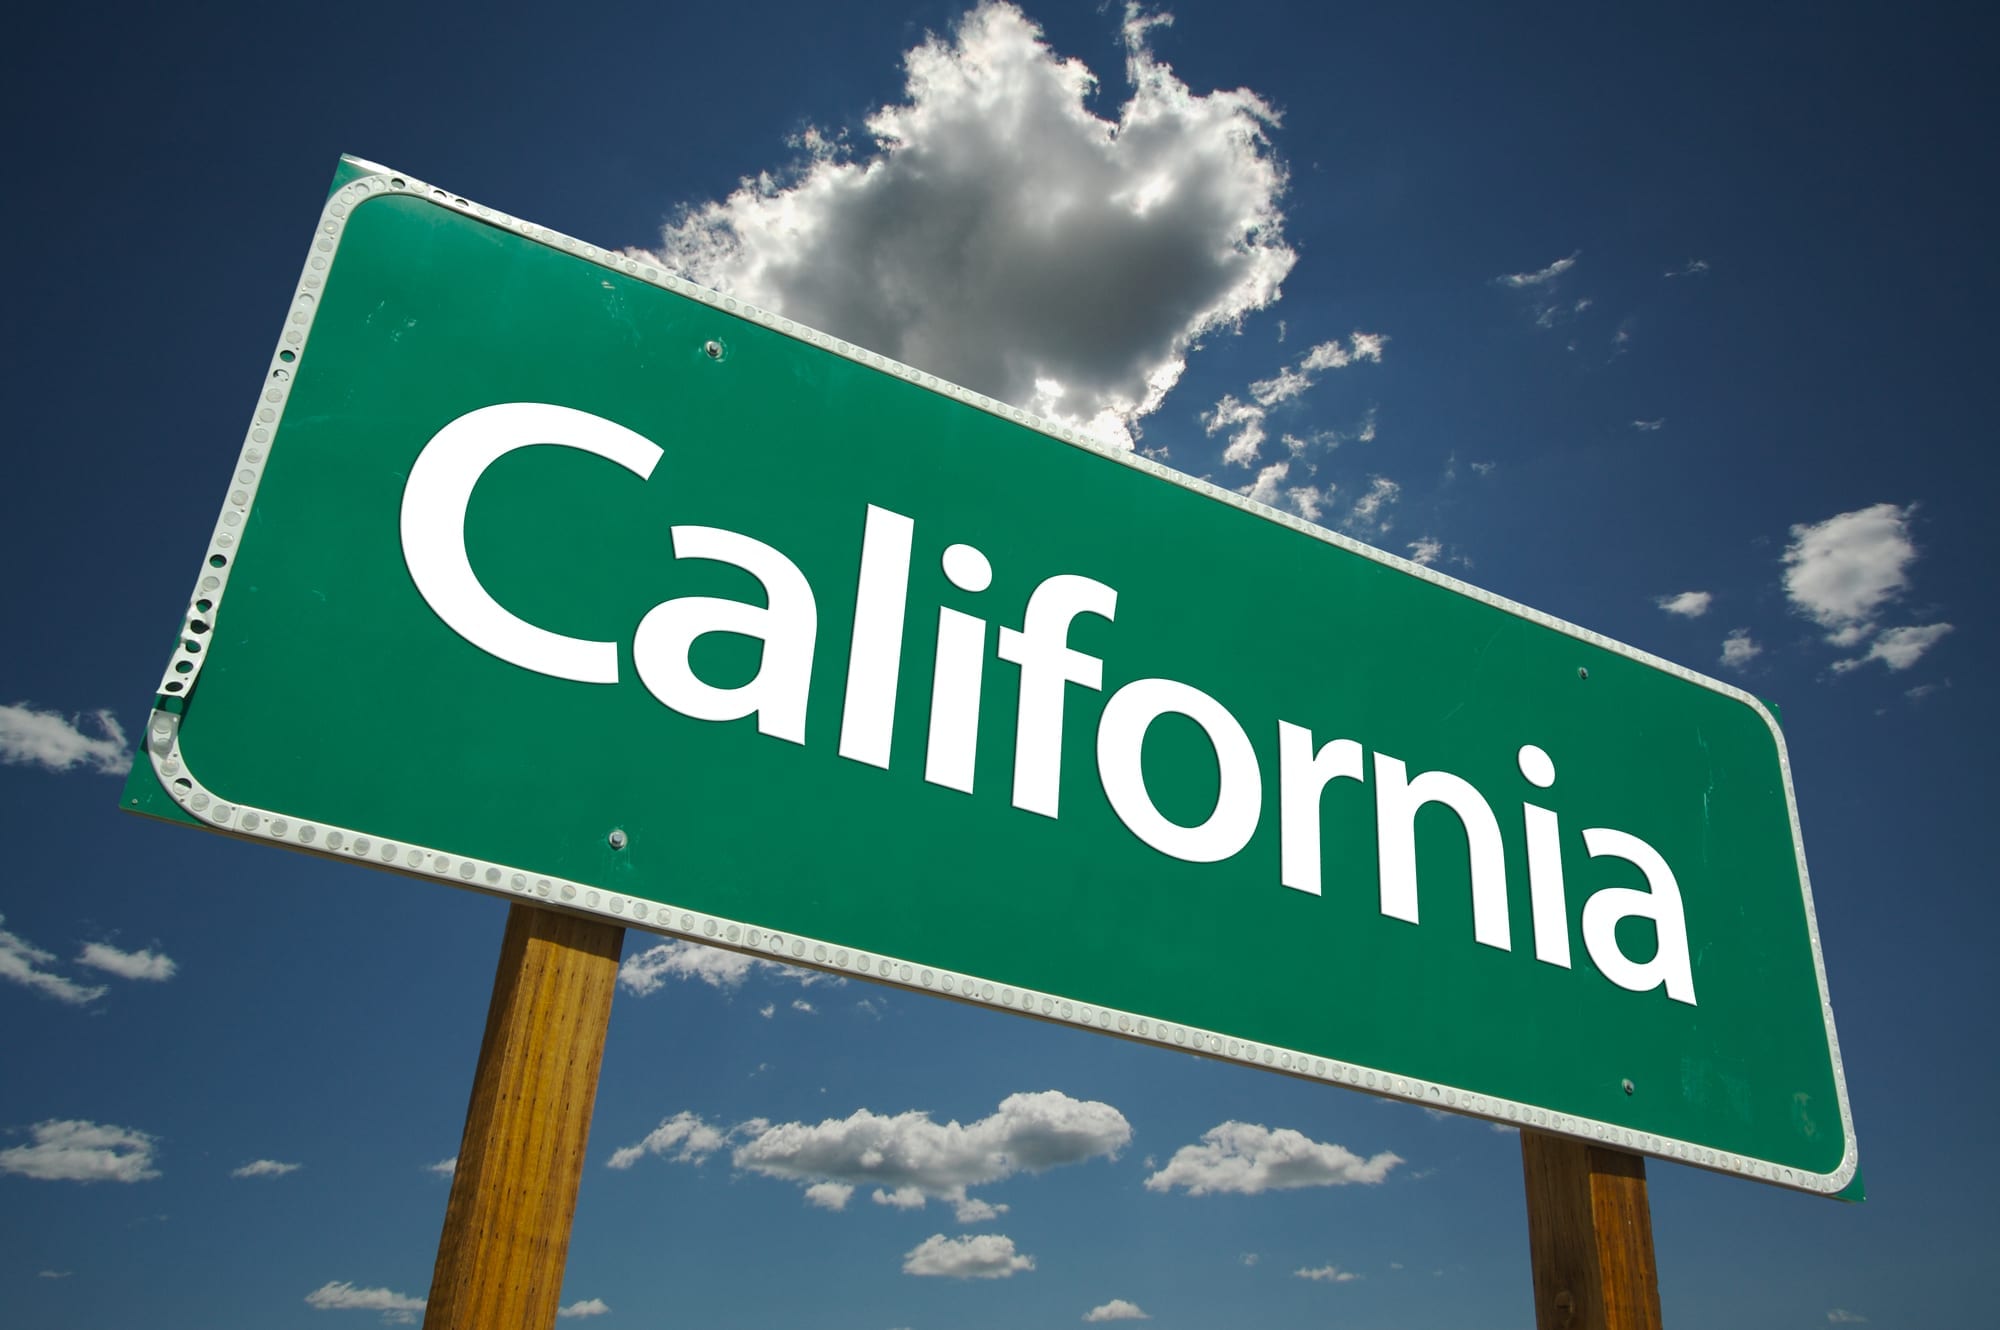 fees costs California probate